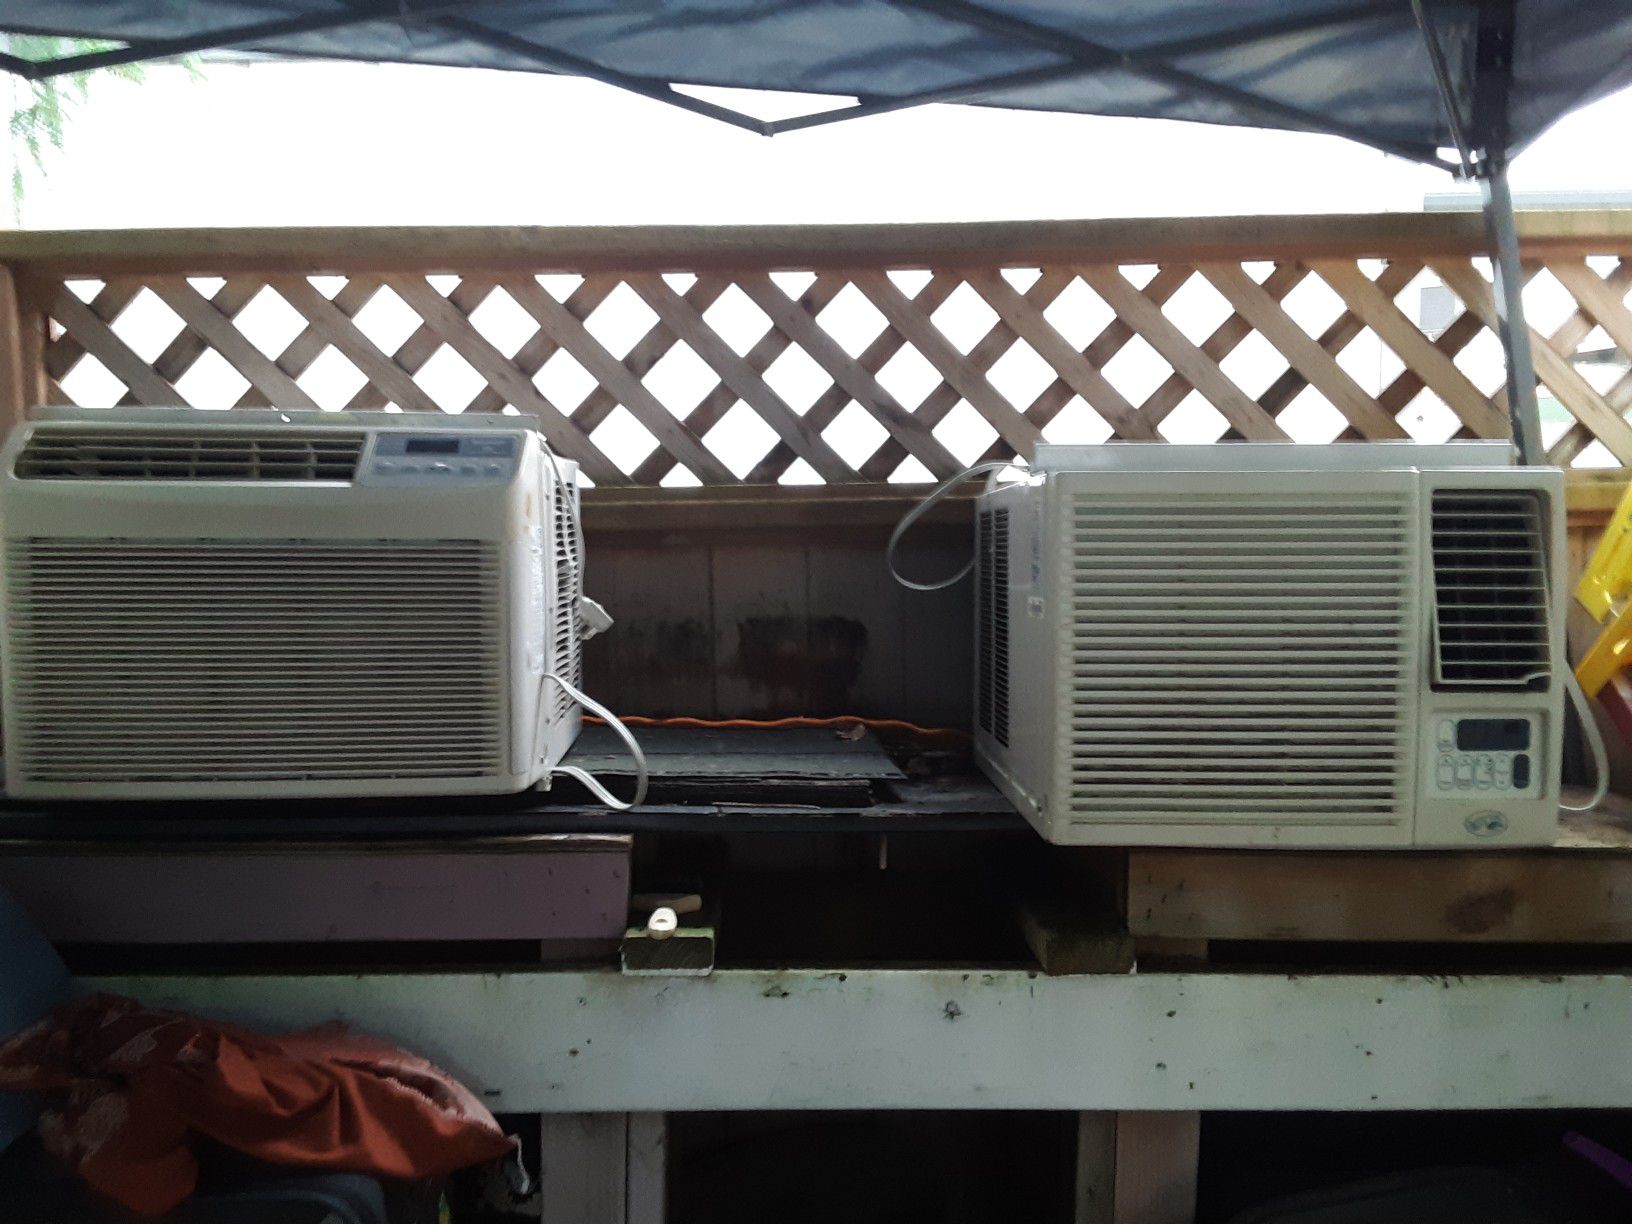 2 Air conditioners